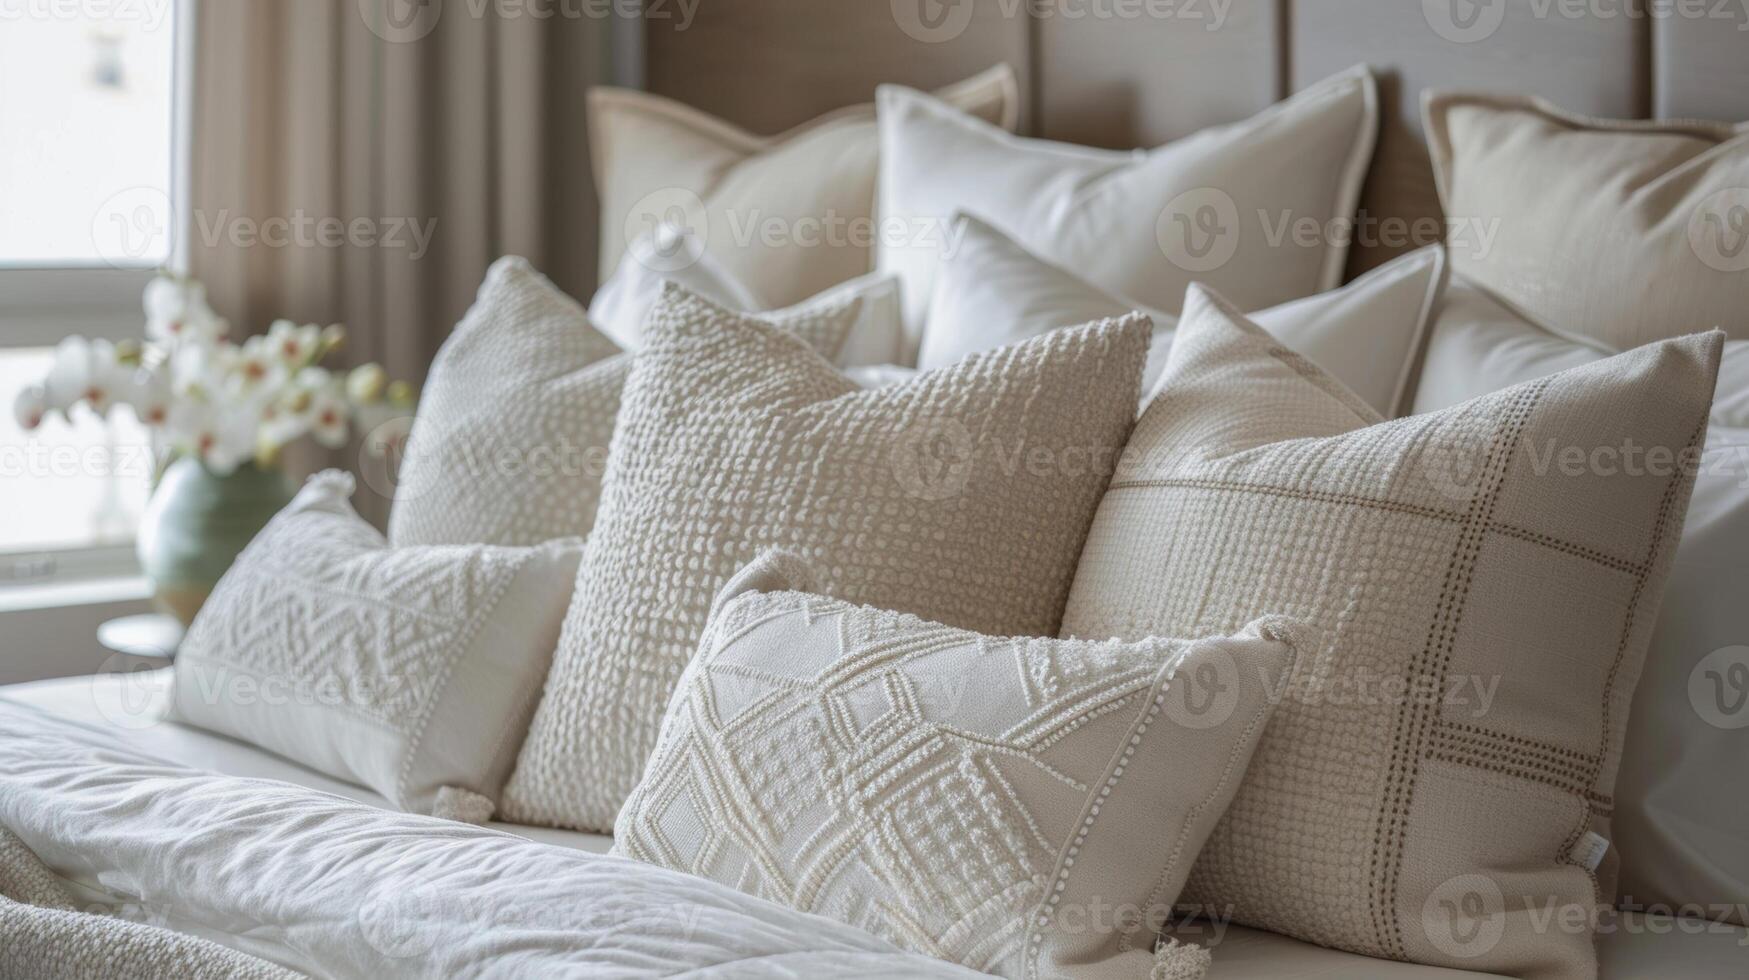 A symmetrical arrangement of Euro shams and decorative cushions all in various shades of ivory adding texture and sophistication to the bed photo